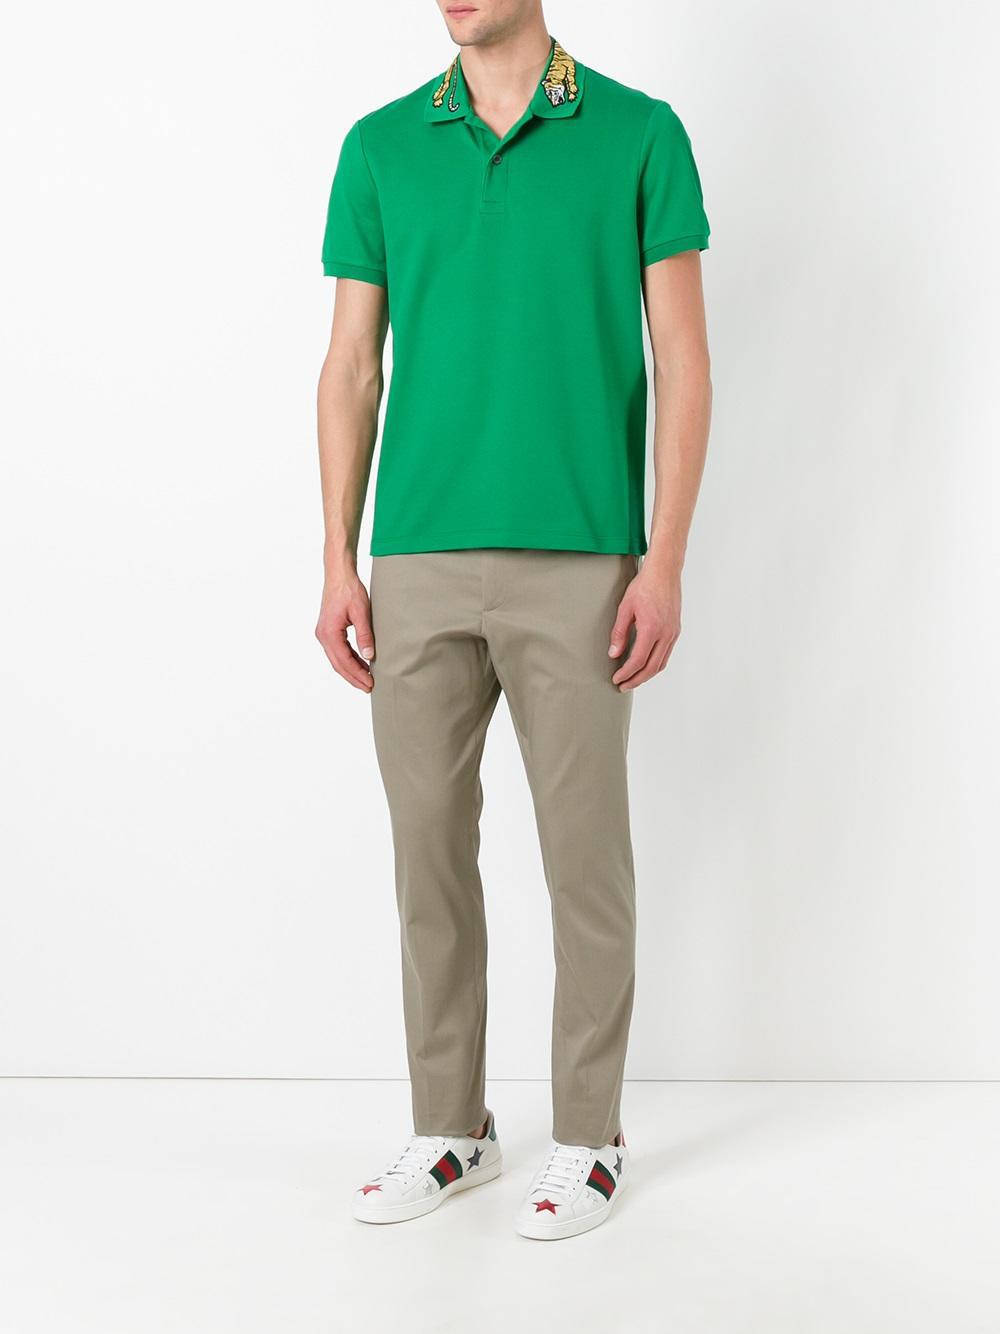 Gucci Tiger Embroidered Polo Shirt in Green for Men | Lyst